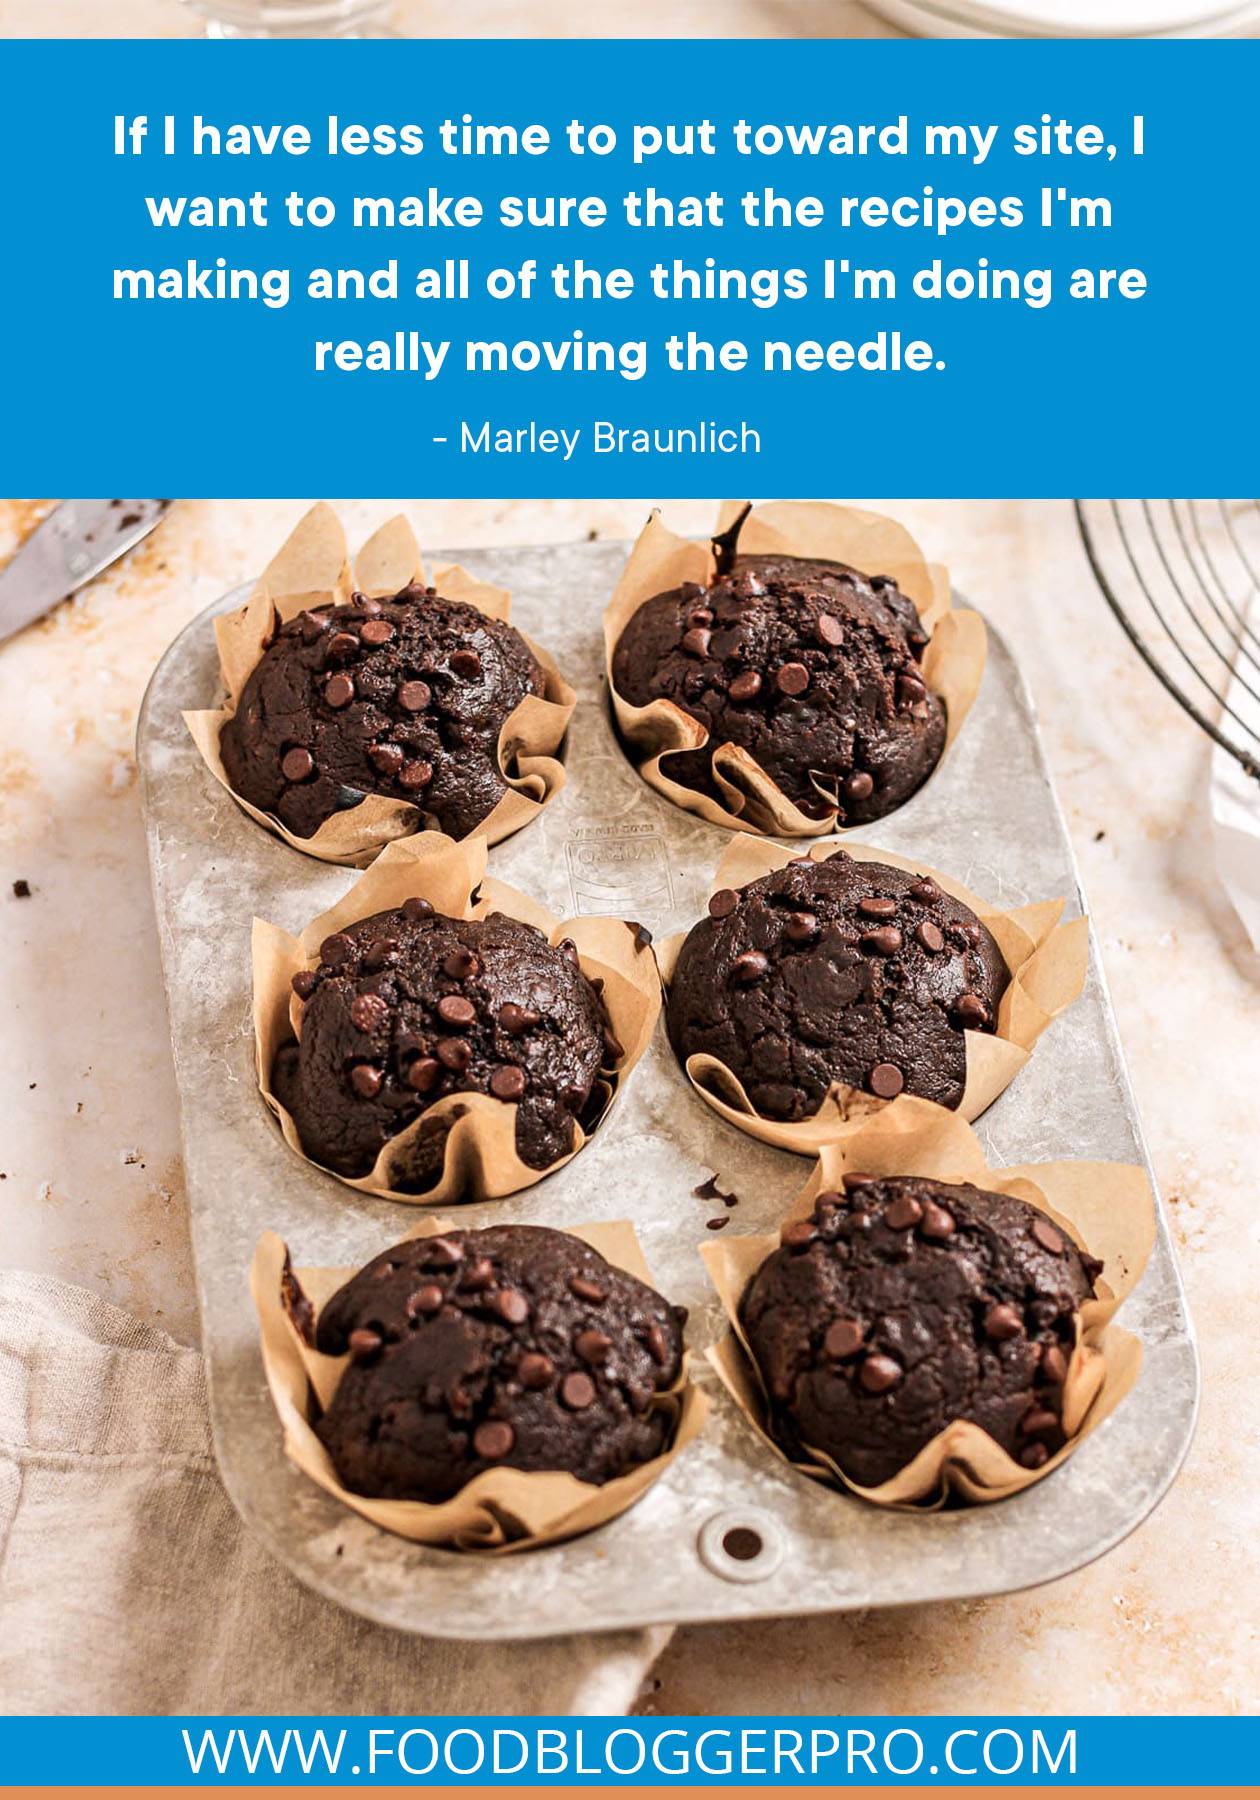 A photograph of chocolate muffins with a quote from Marley Braunlich's episode of The Food Blogger Pro Podcast, "If I have less time to put toward my site, I want to make sure that the recipes I'm making and all of the things I'm doing are really moving the needle."